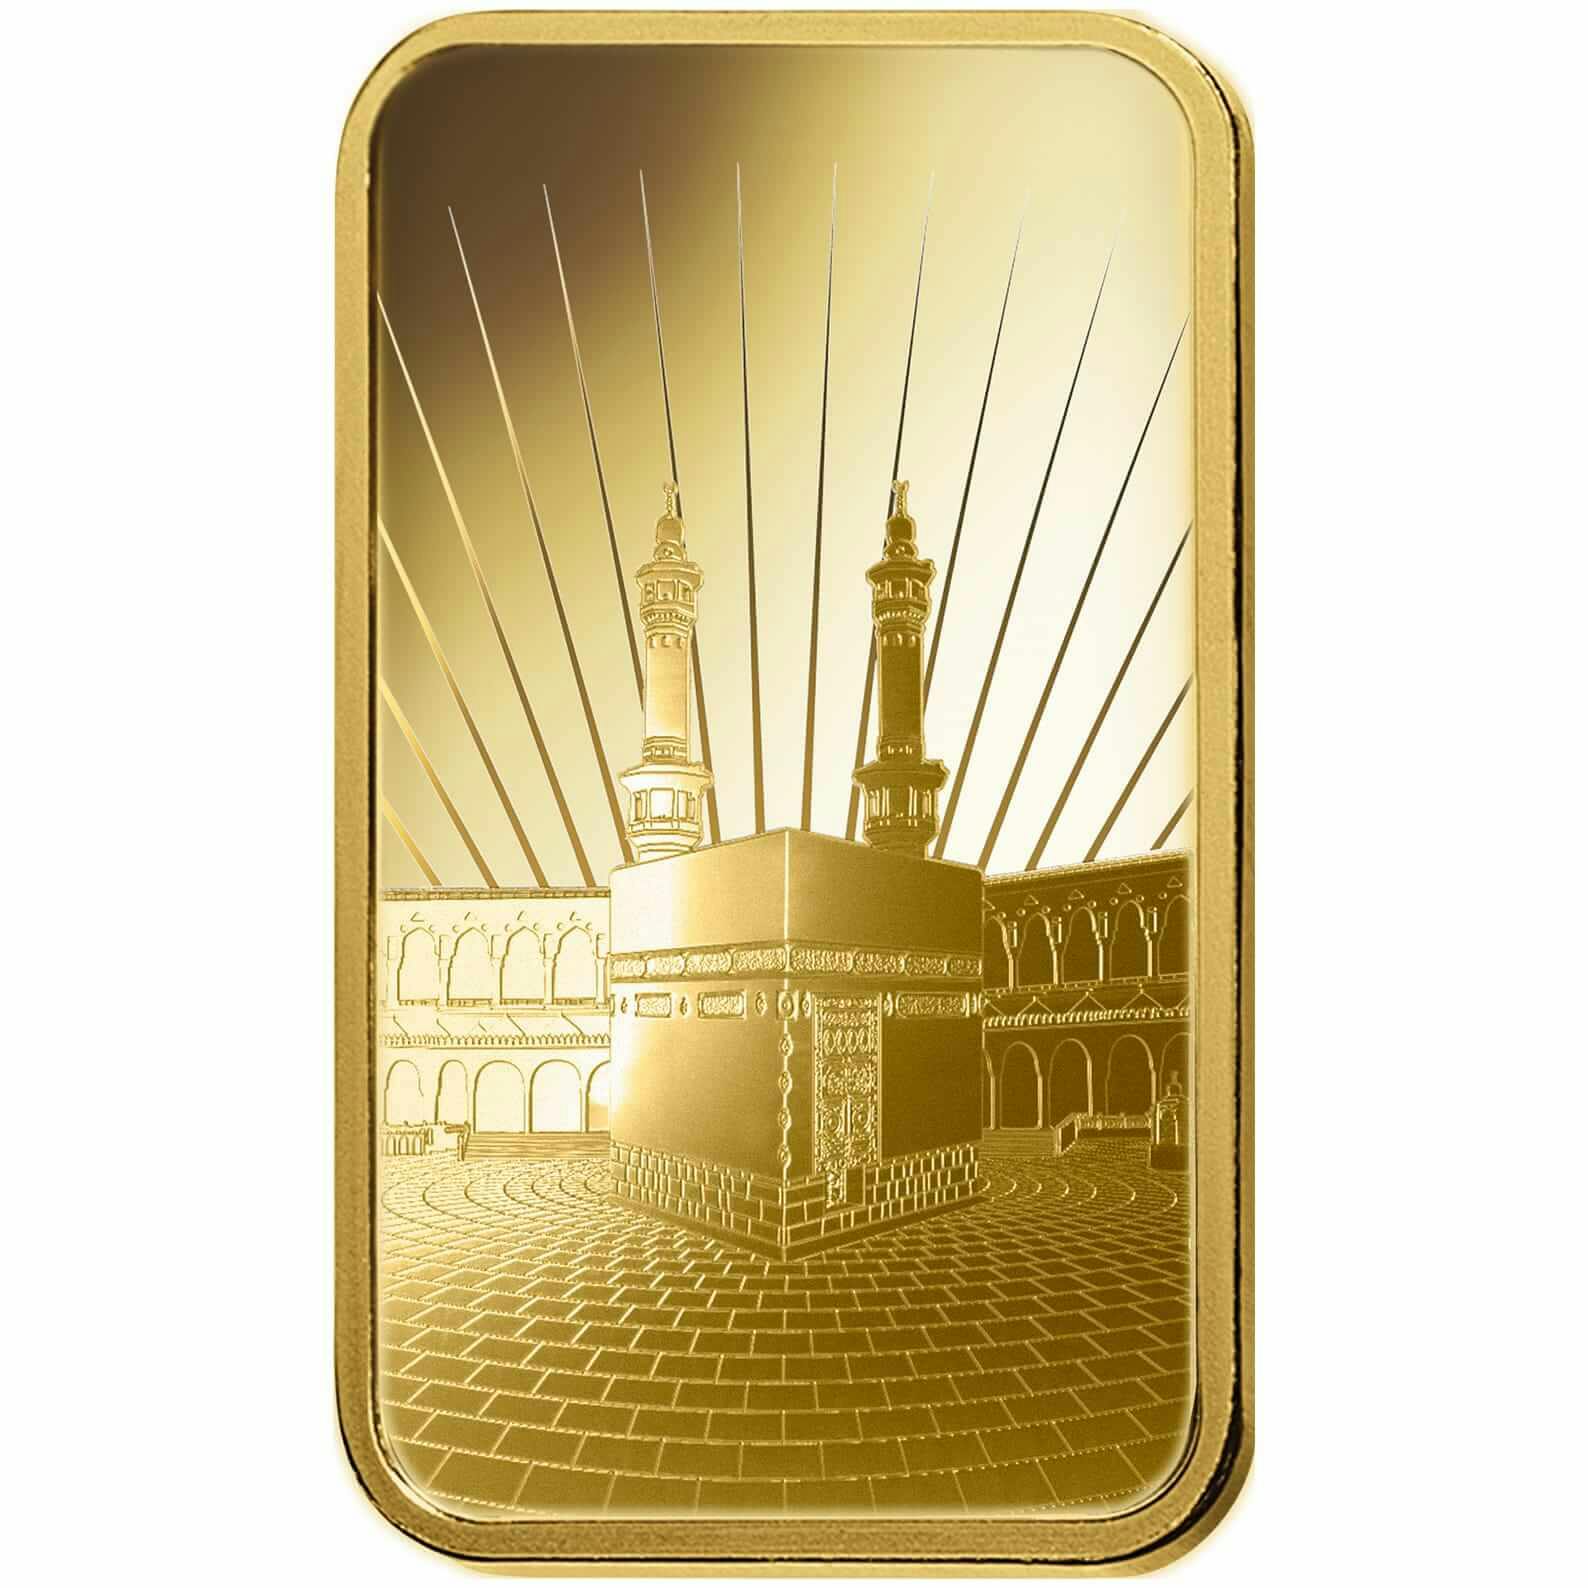 Achat d'or, 1 oz d'or pur Ka'Bah Mecca - PAMP Suisse - Front 